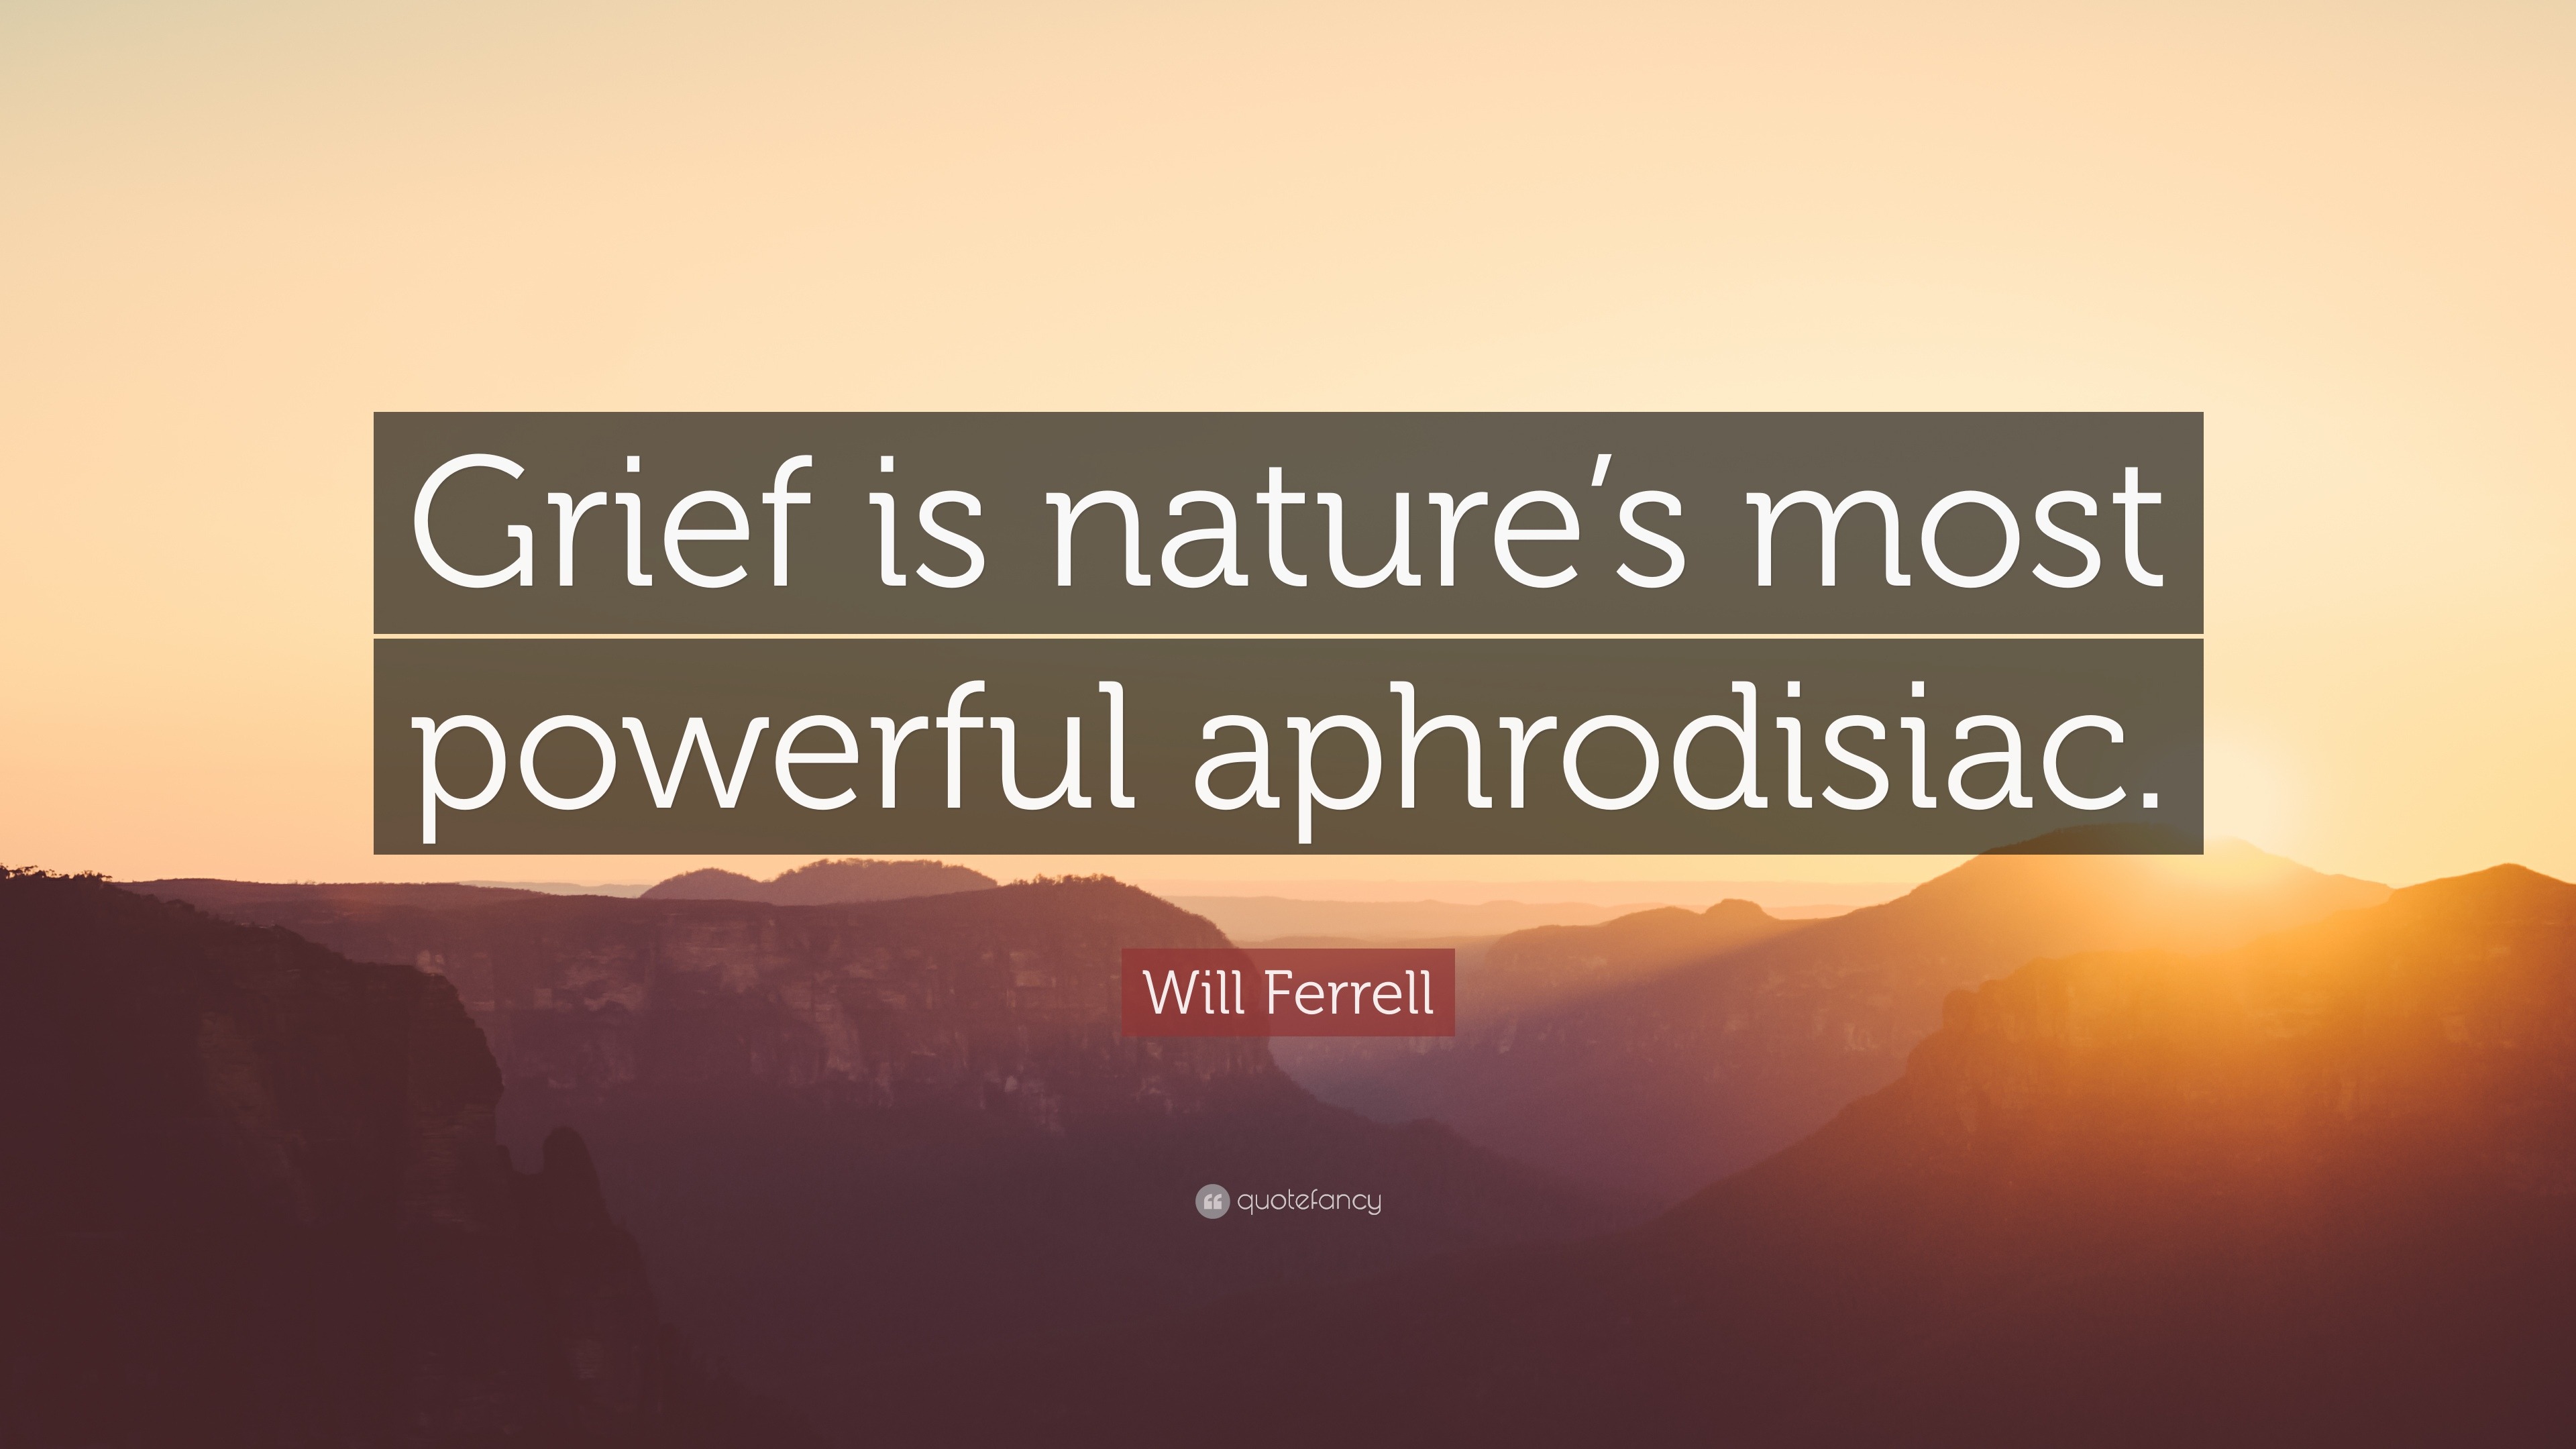 Will Ferrell Quote “Grief is nature s most powerful aphrodisiac ”